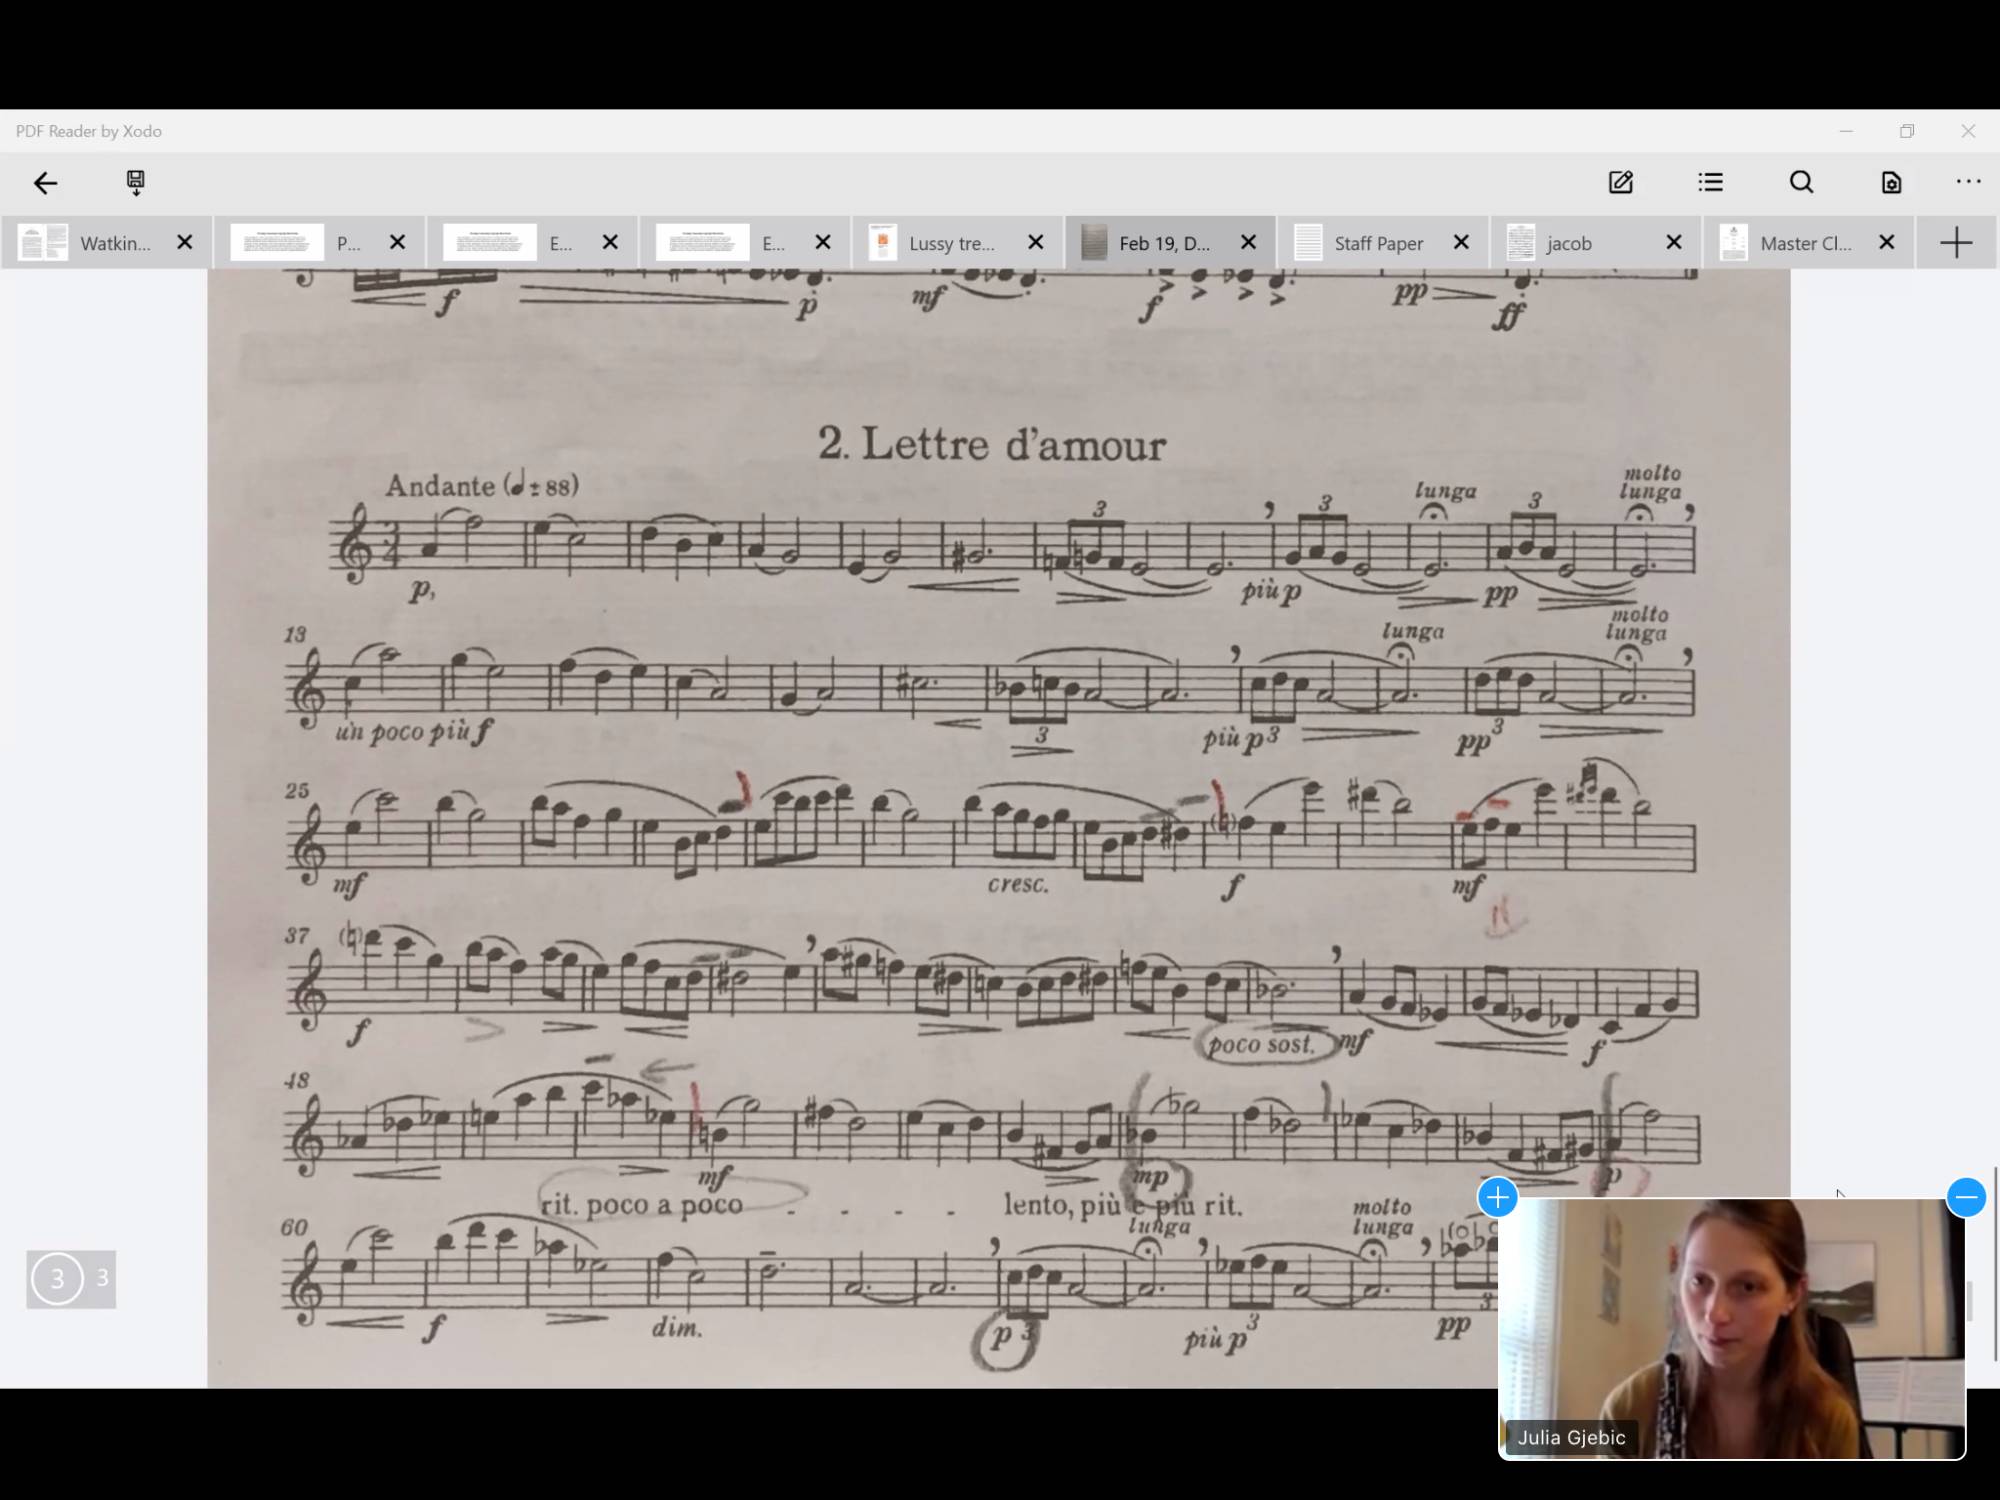 Zoom photo from Julia Gjebic Master Class - score and a photo of Julia in the bottom right corner.